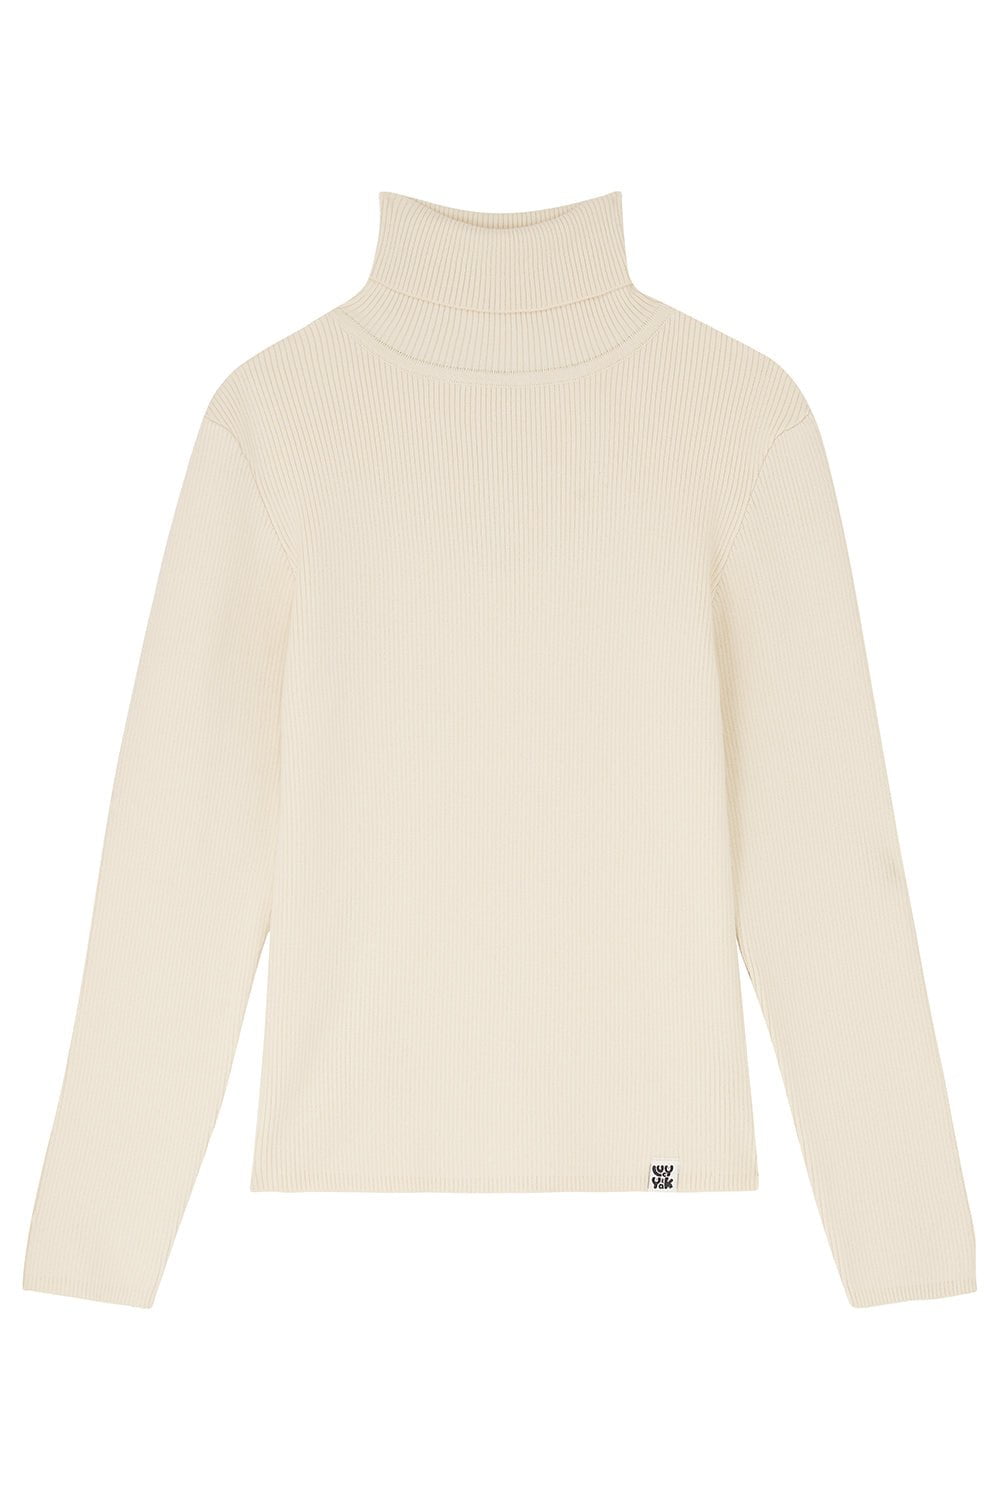 Lucy & Yak Tops Aiden Roll neck Top: ORGANIC COTTON KNIT - Pearl